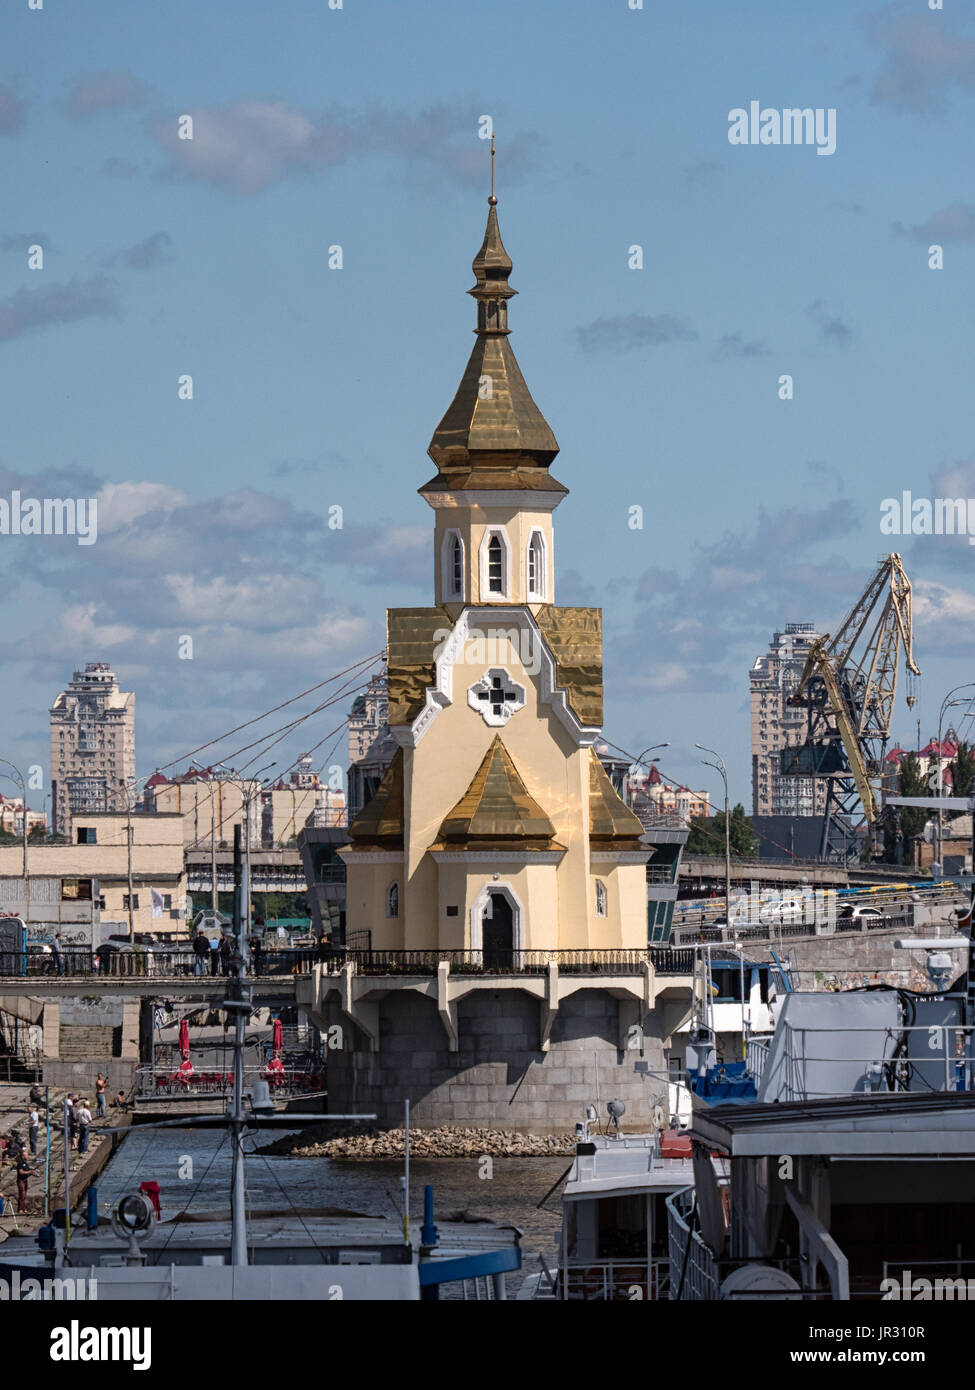 KYIV, UKRAINE - JUNE 12, 2016:  St. Nicolas Wondermaker on The Water Church on the Dnieper (Dnipro) River in the Podil District Stock Photo